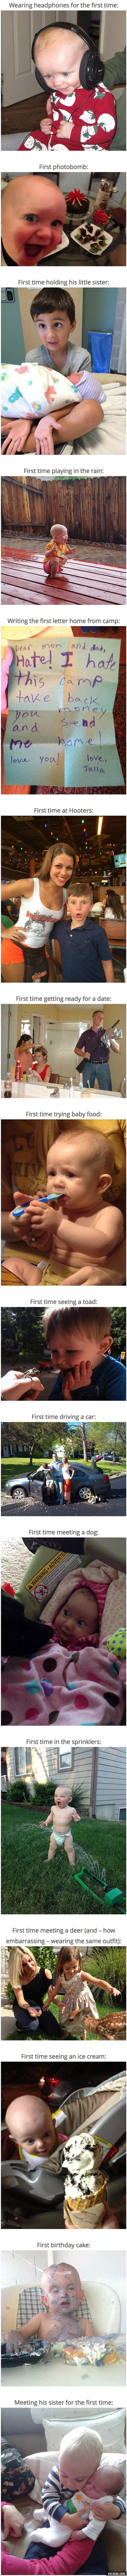 16 kids doing stuff for the first time